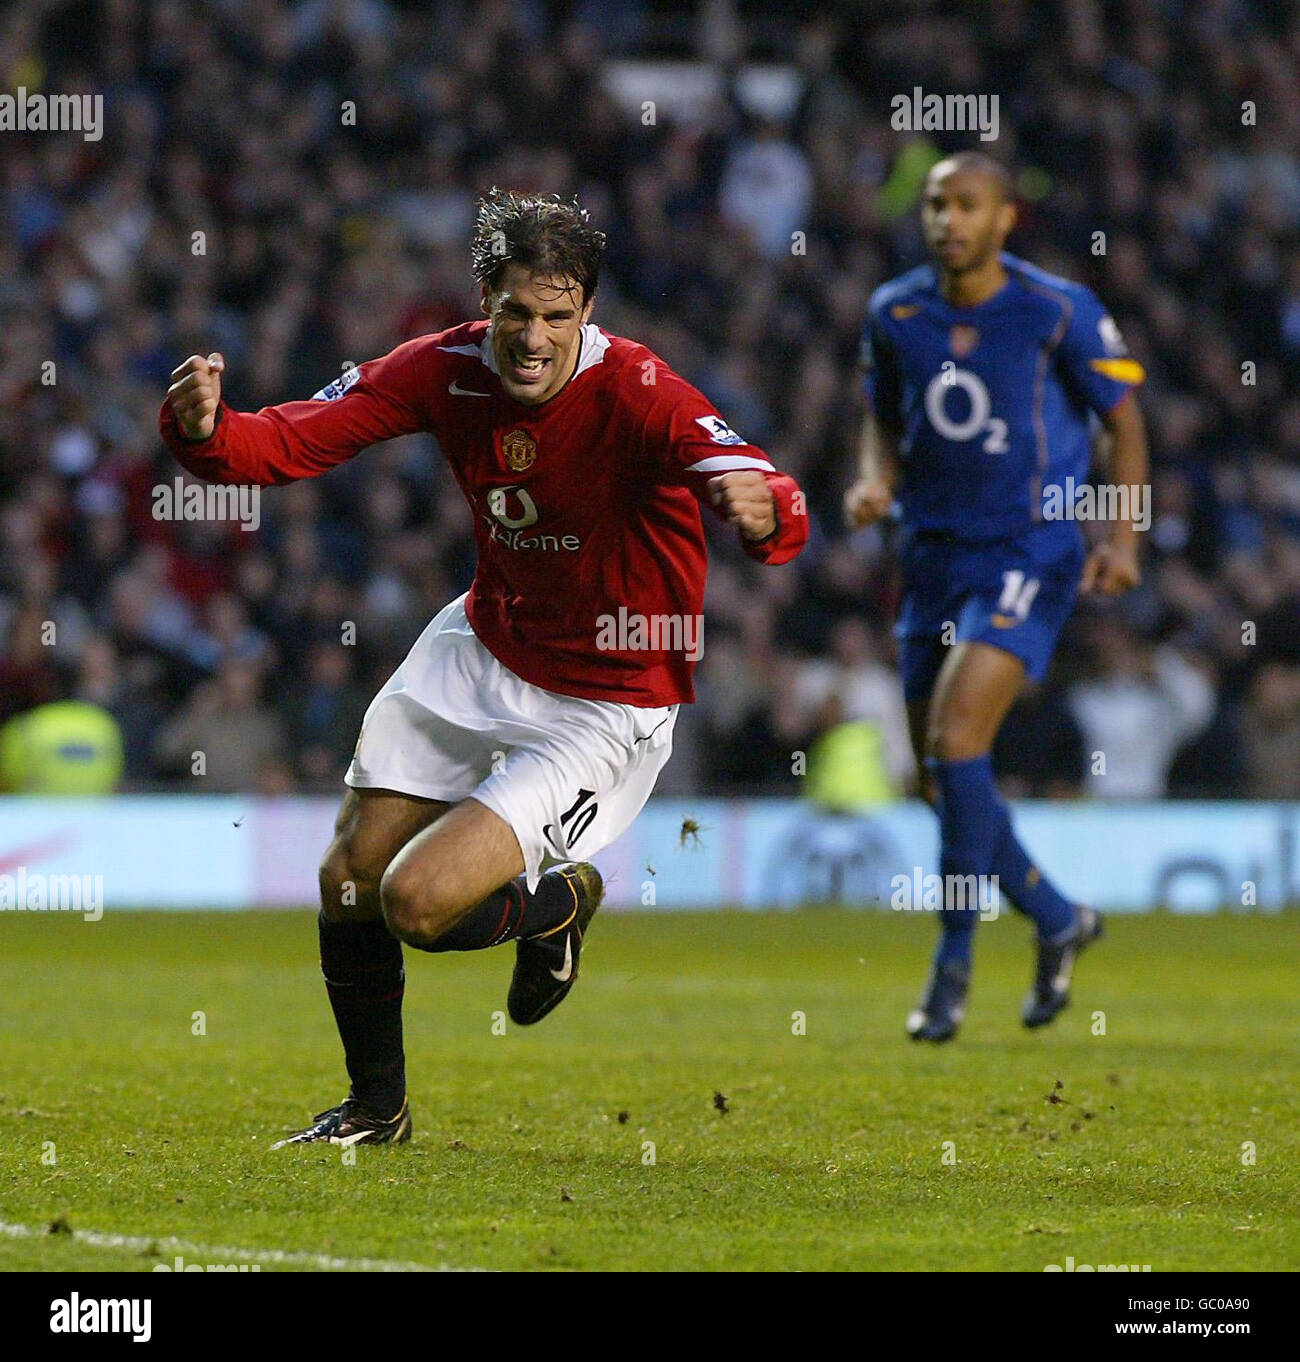 Manchester United's Ruud van Nistelrooy celebrates scoring the opening goal from the penalty spot Stock Photo